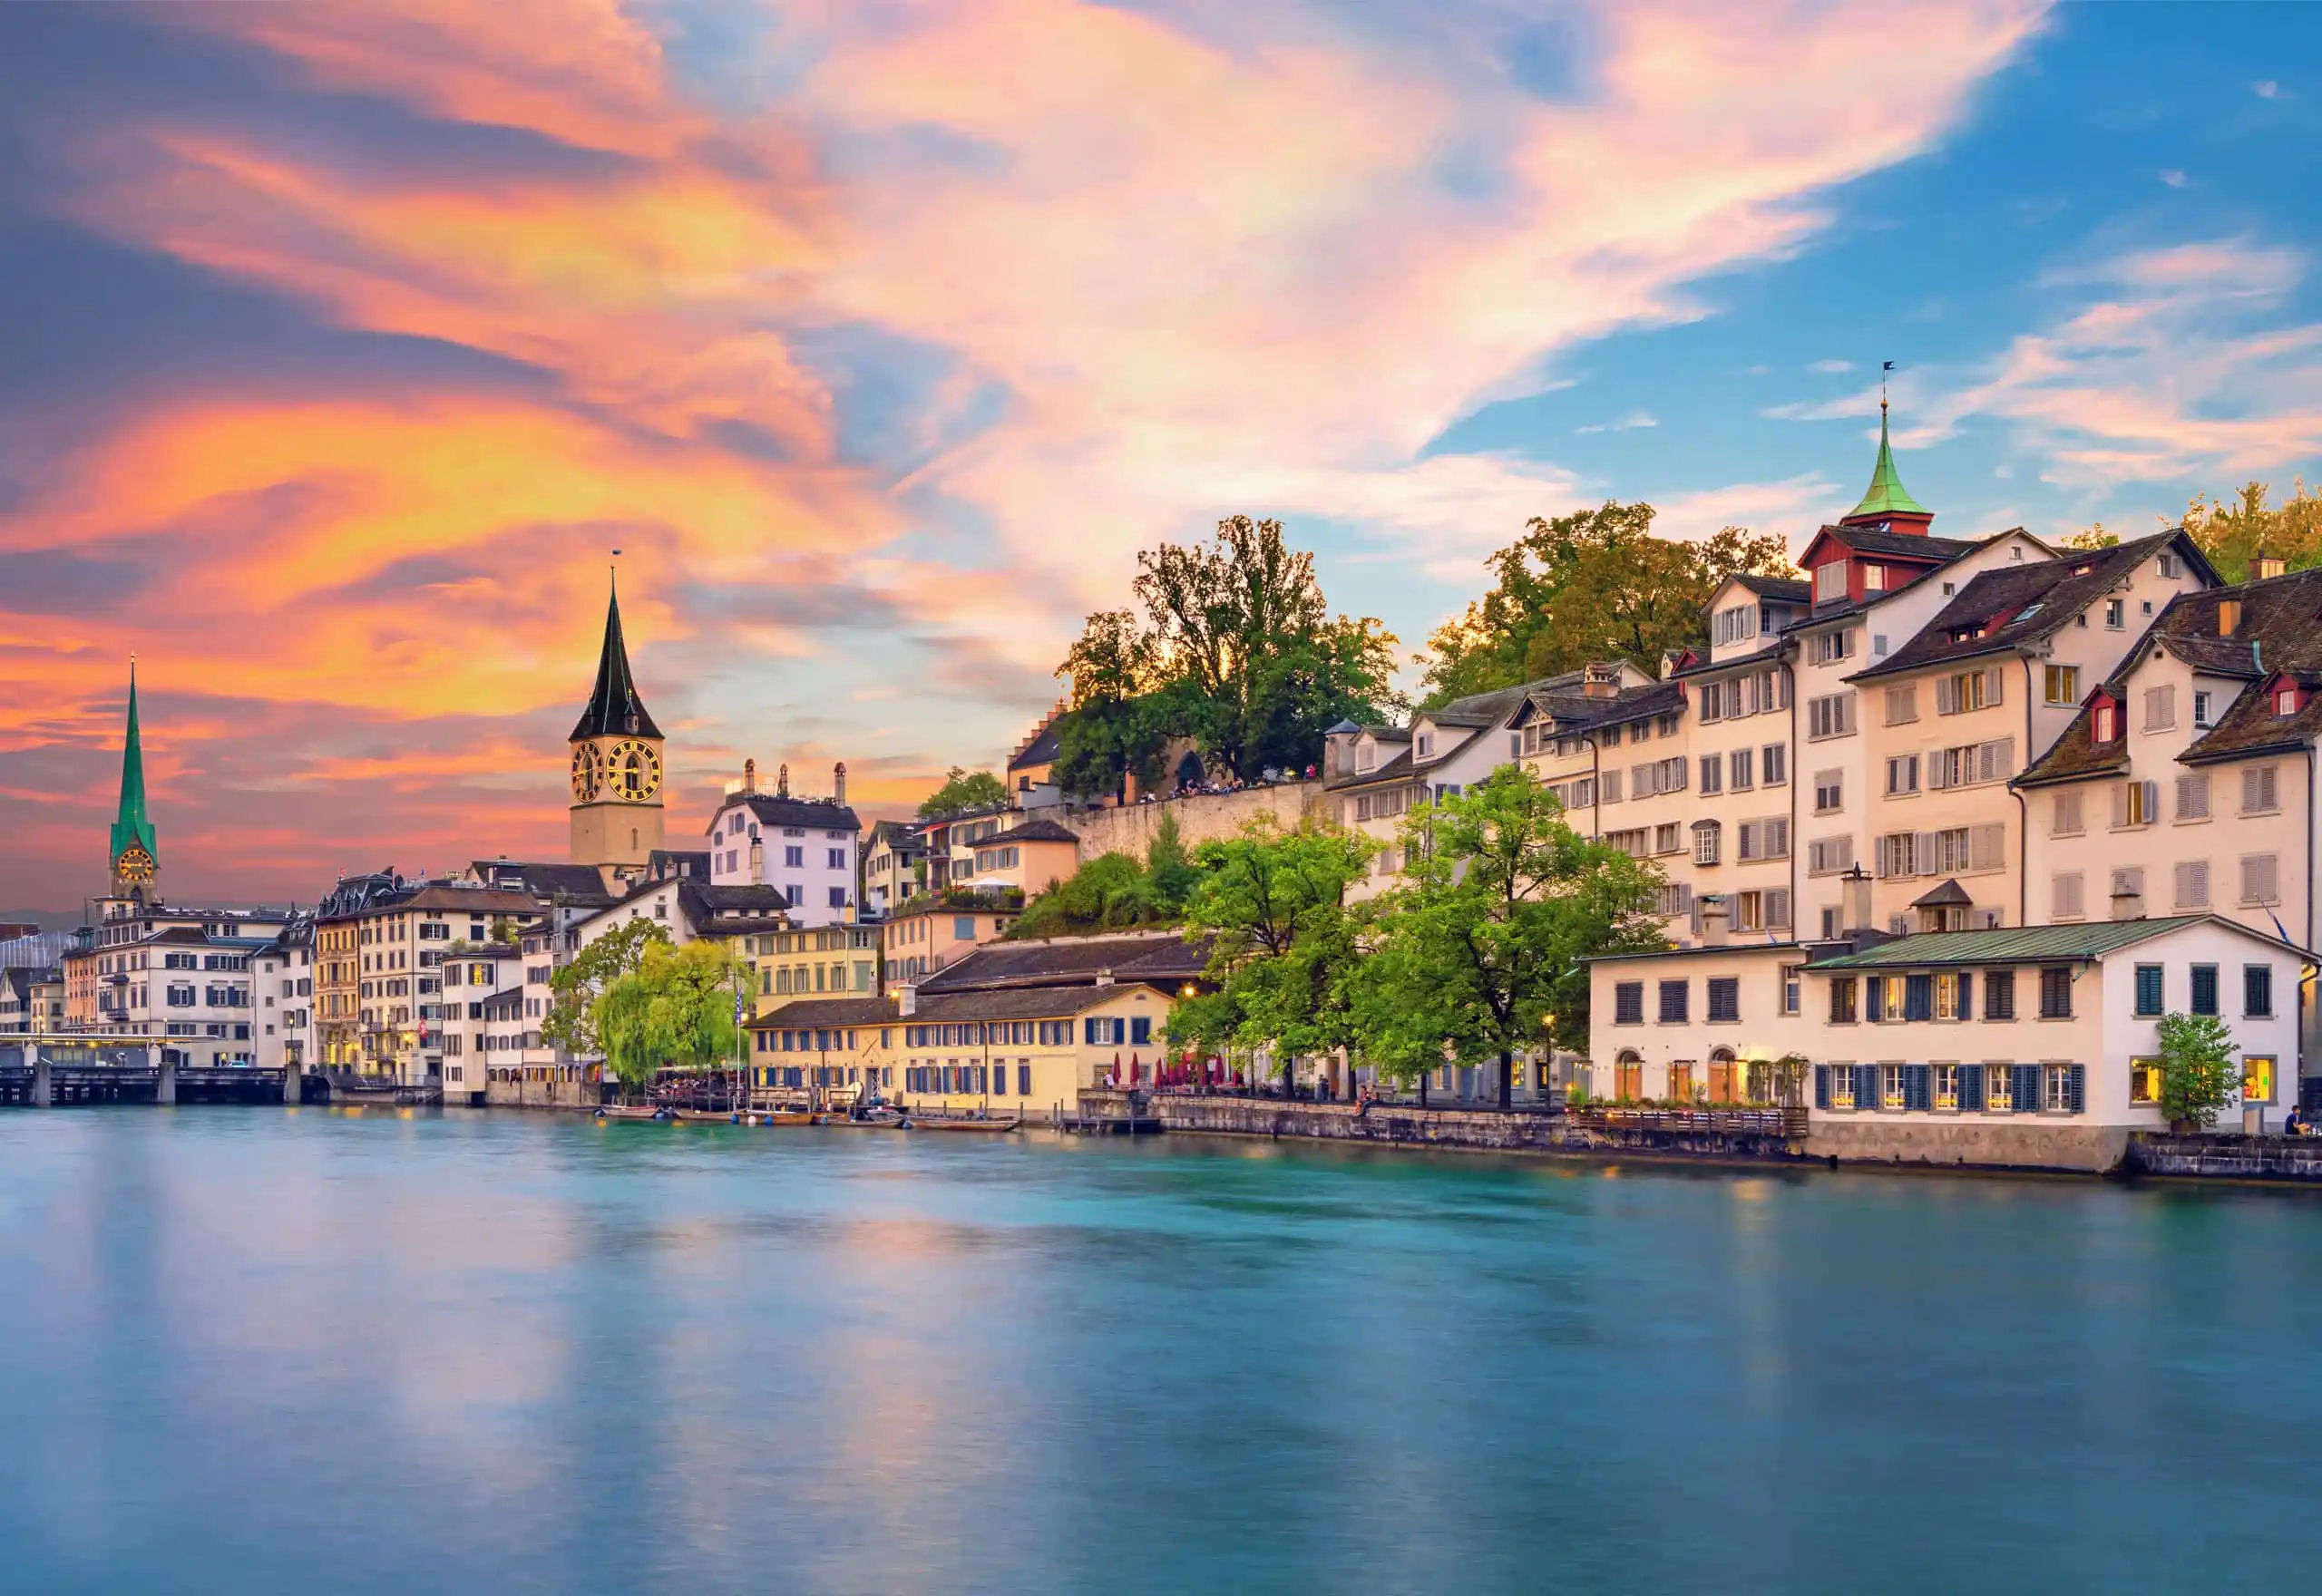 Safety Training Courses in Zurich